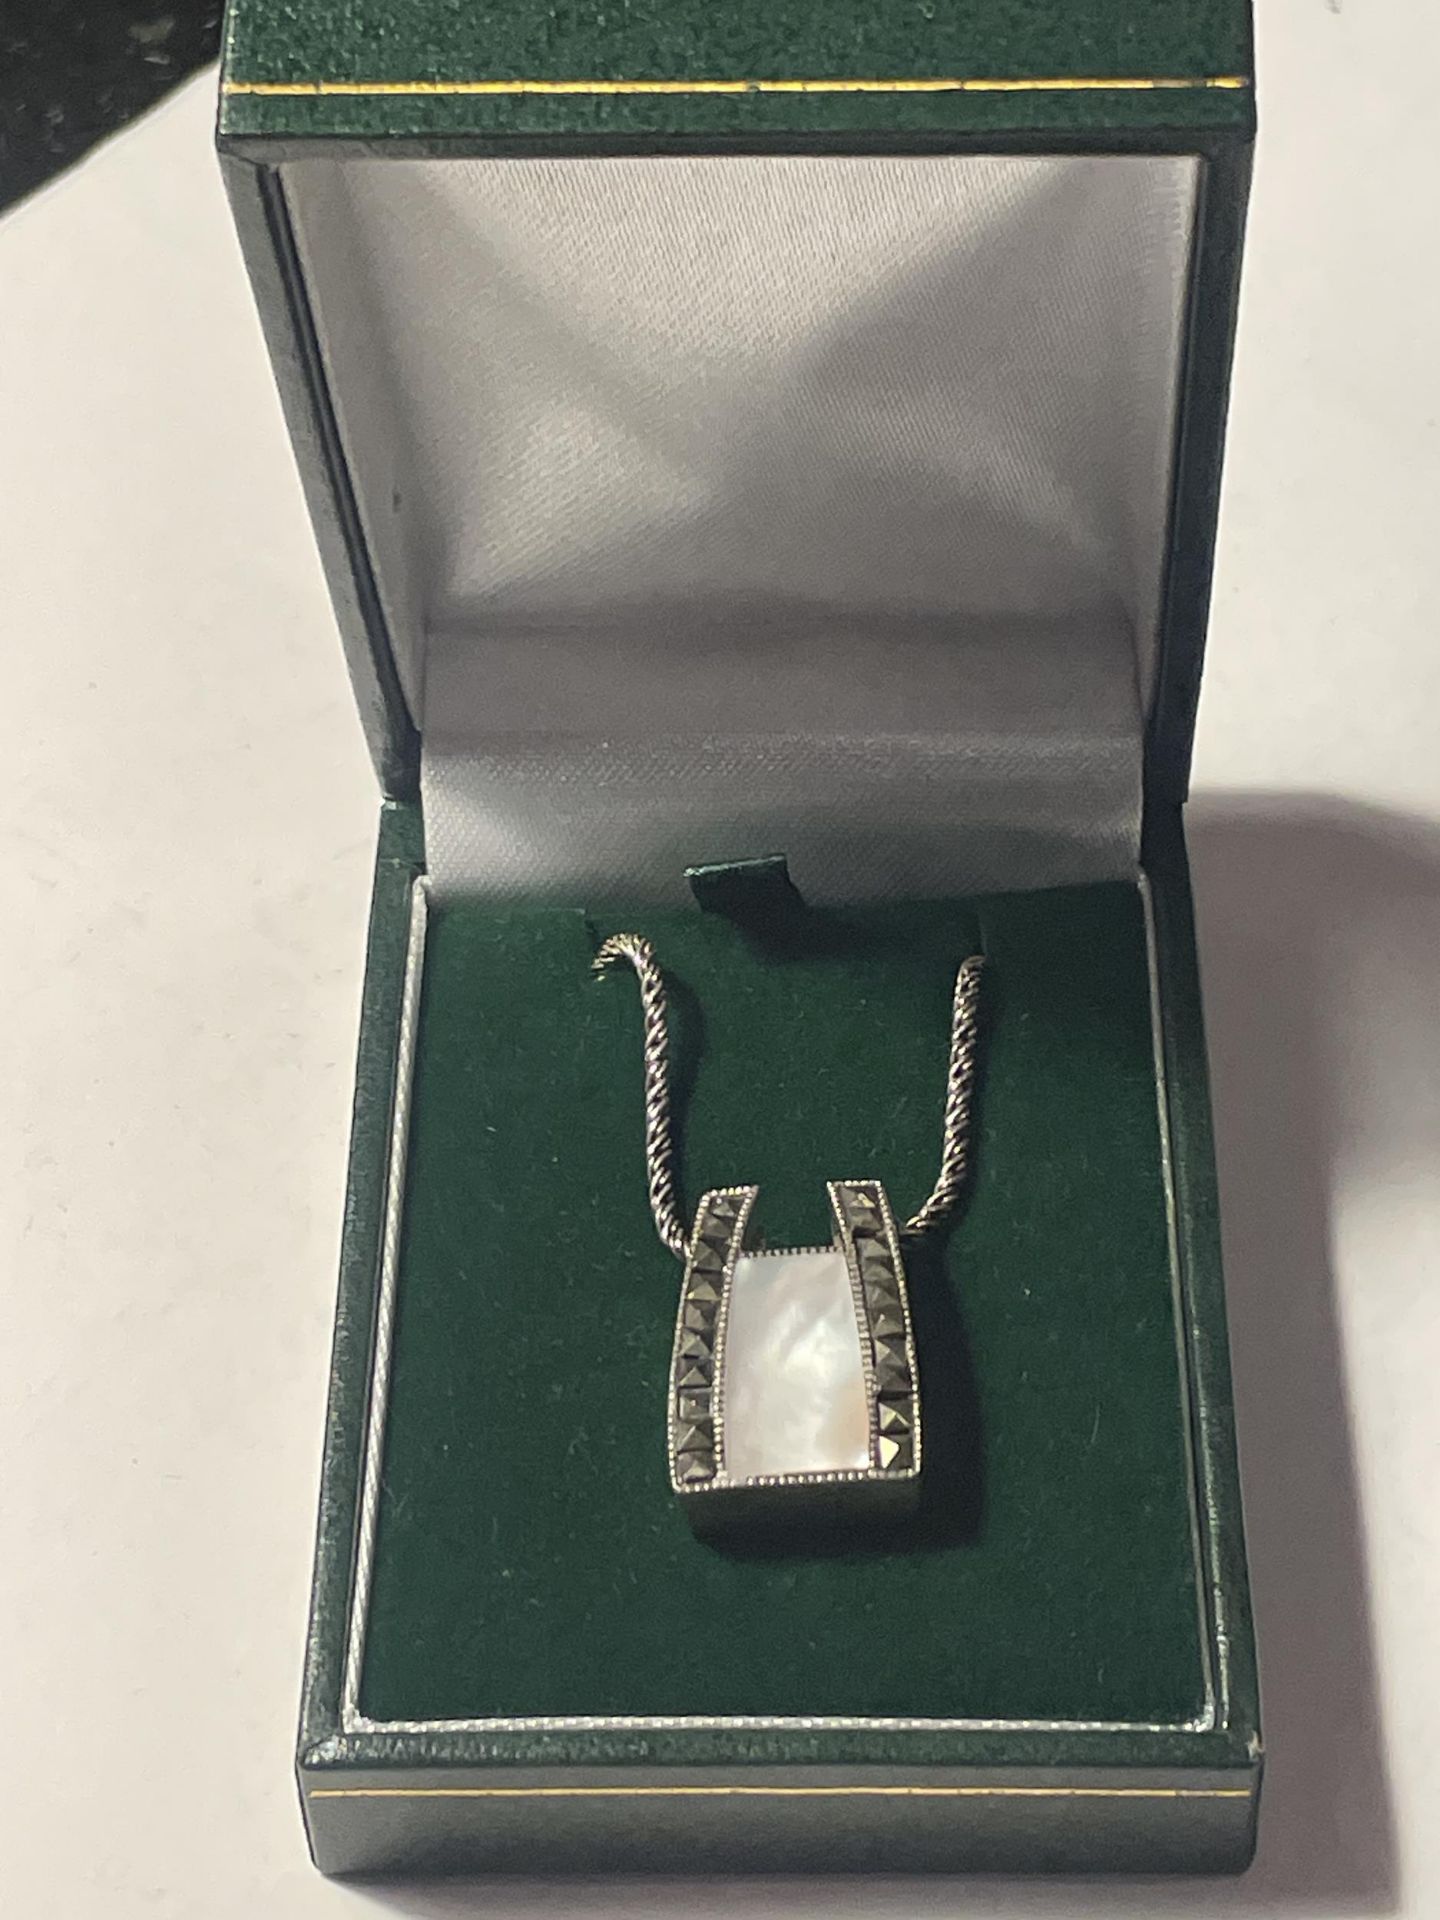 A SILVER NECKLACE WITH A MOTHER OF PEARL AND MARCASITE DECO STYLE PENDANT IN A PRESENTATION BOX